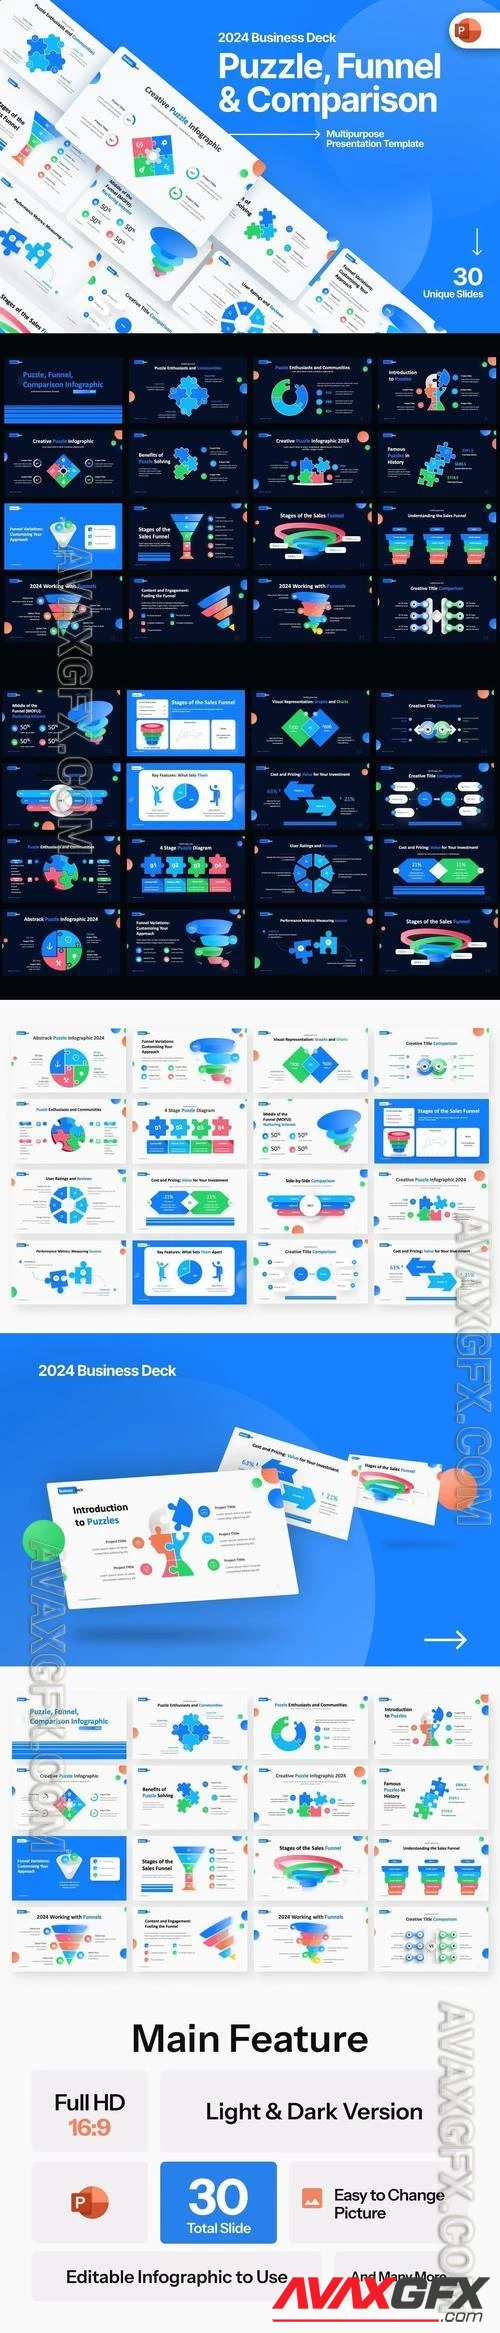 Puzzle, Funnel and Comparison PowerPoint Template